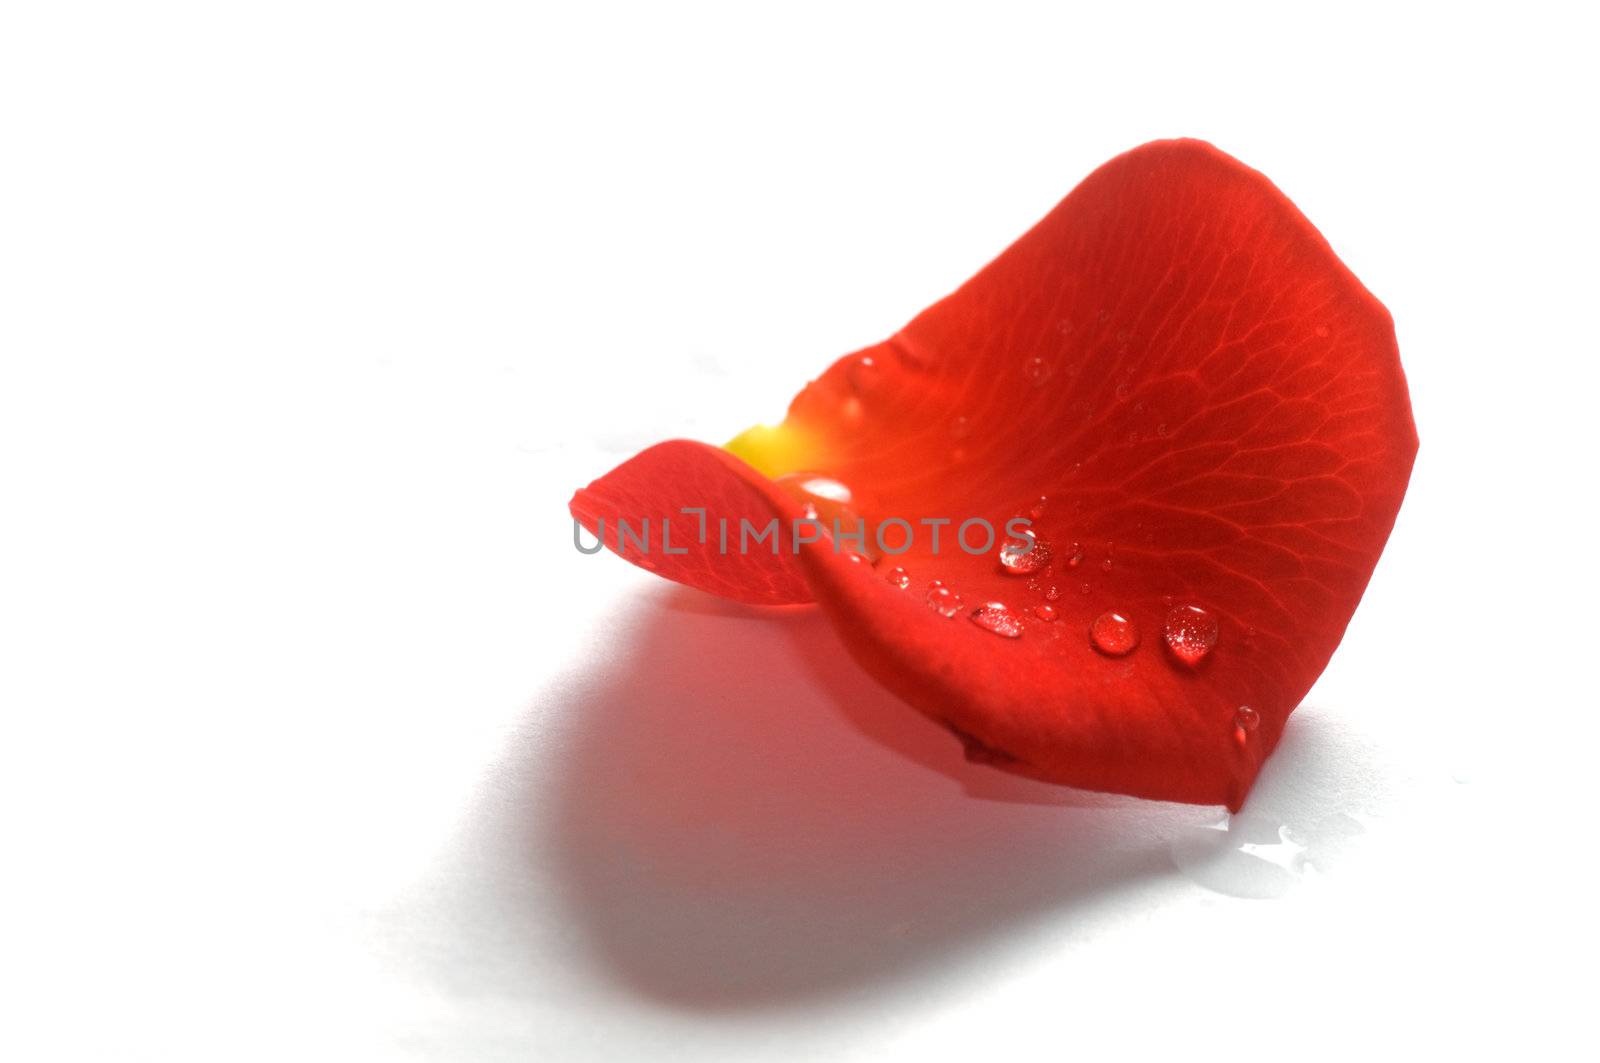 A fresh rose petal with water droplets on white background